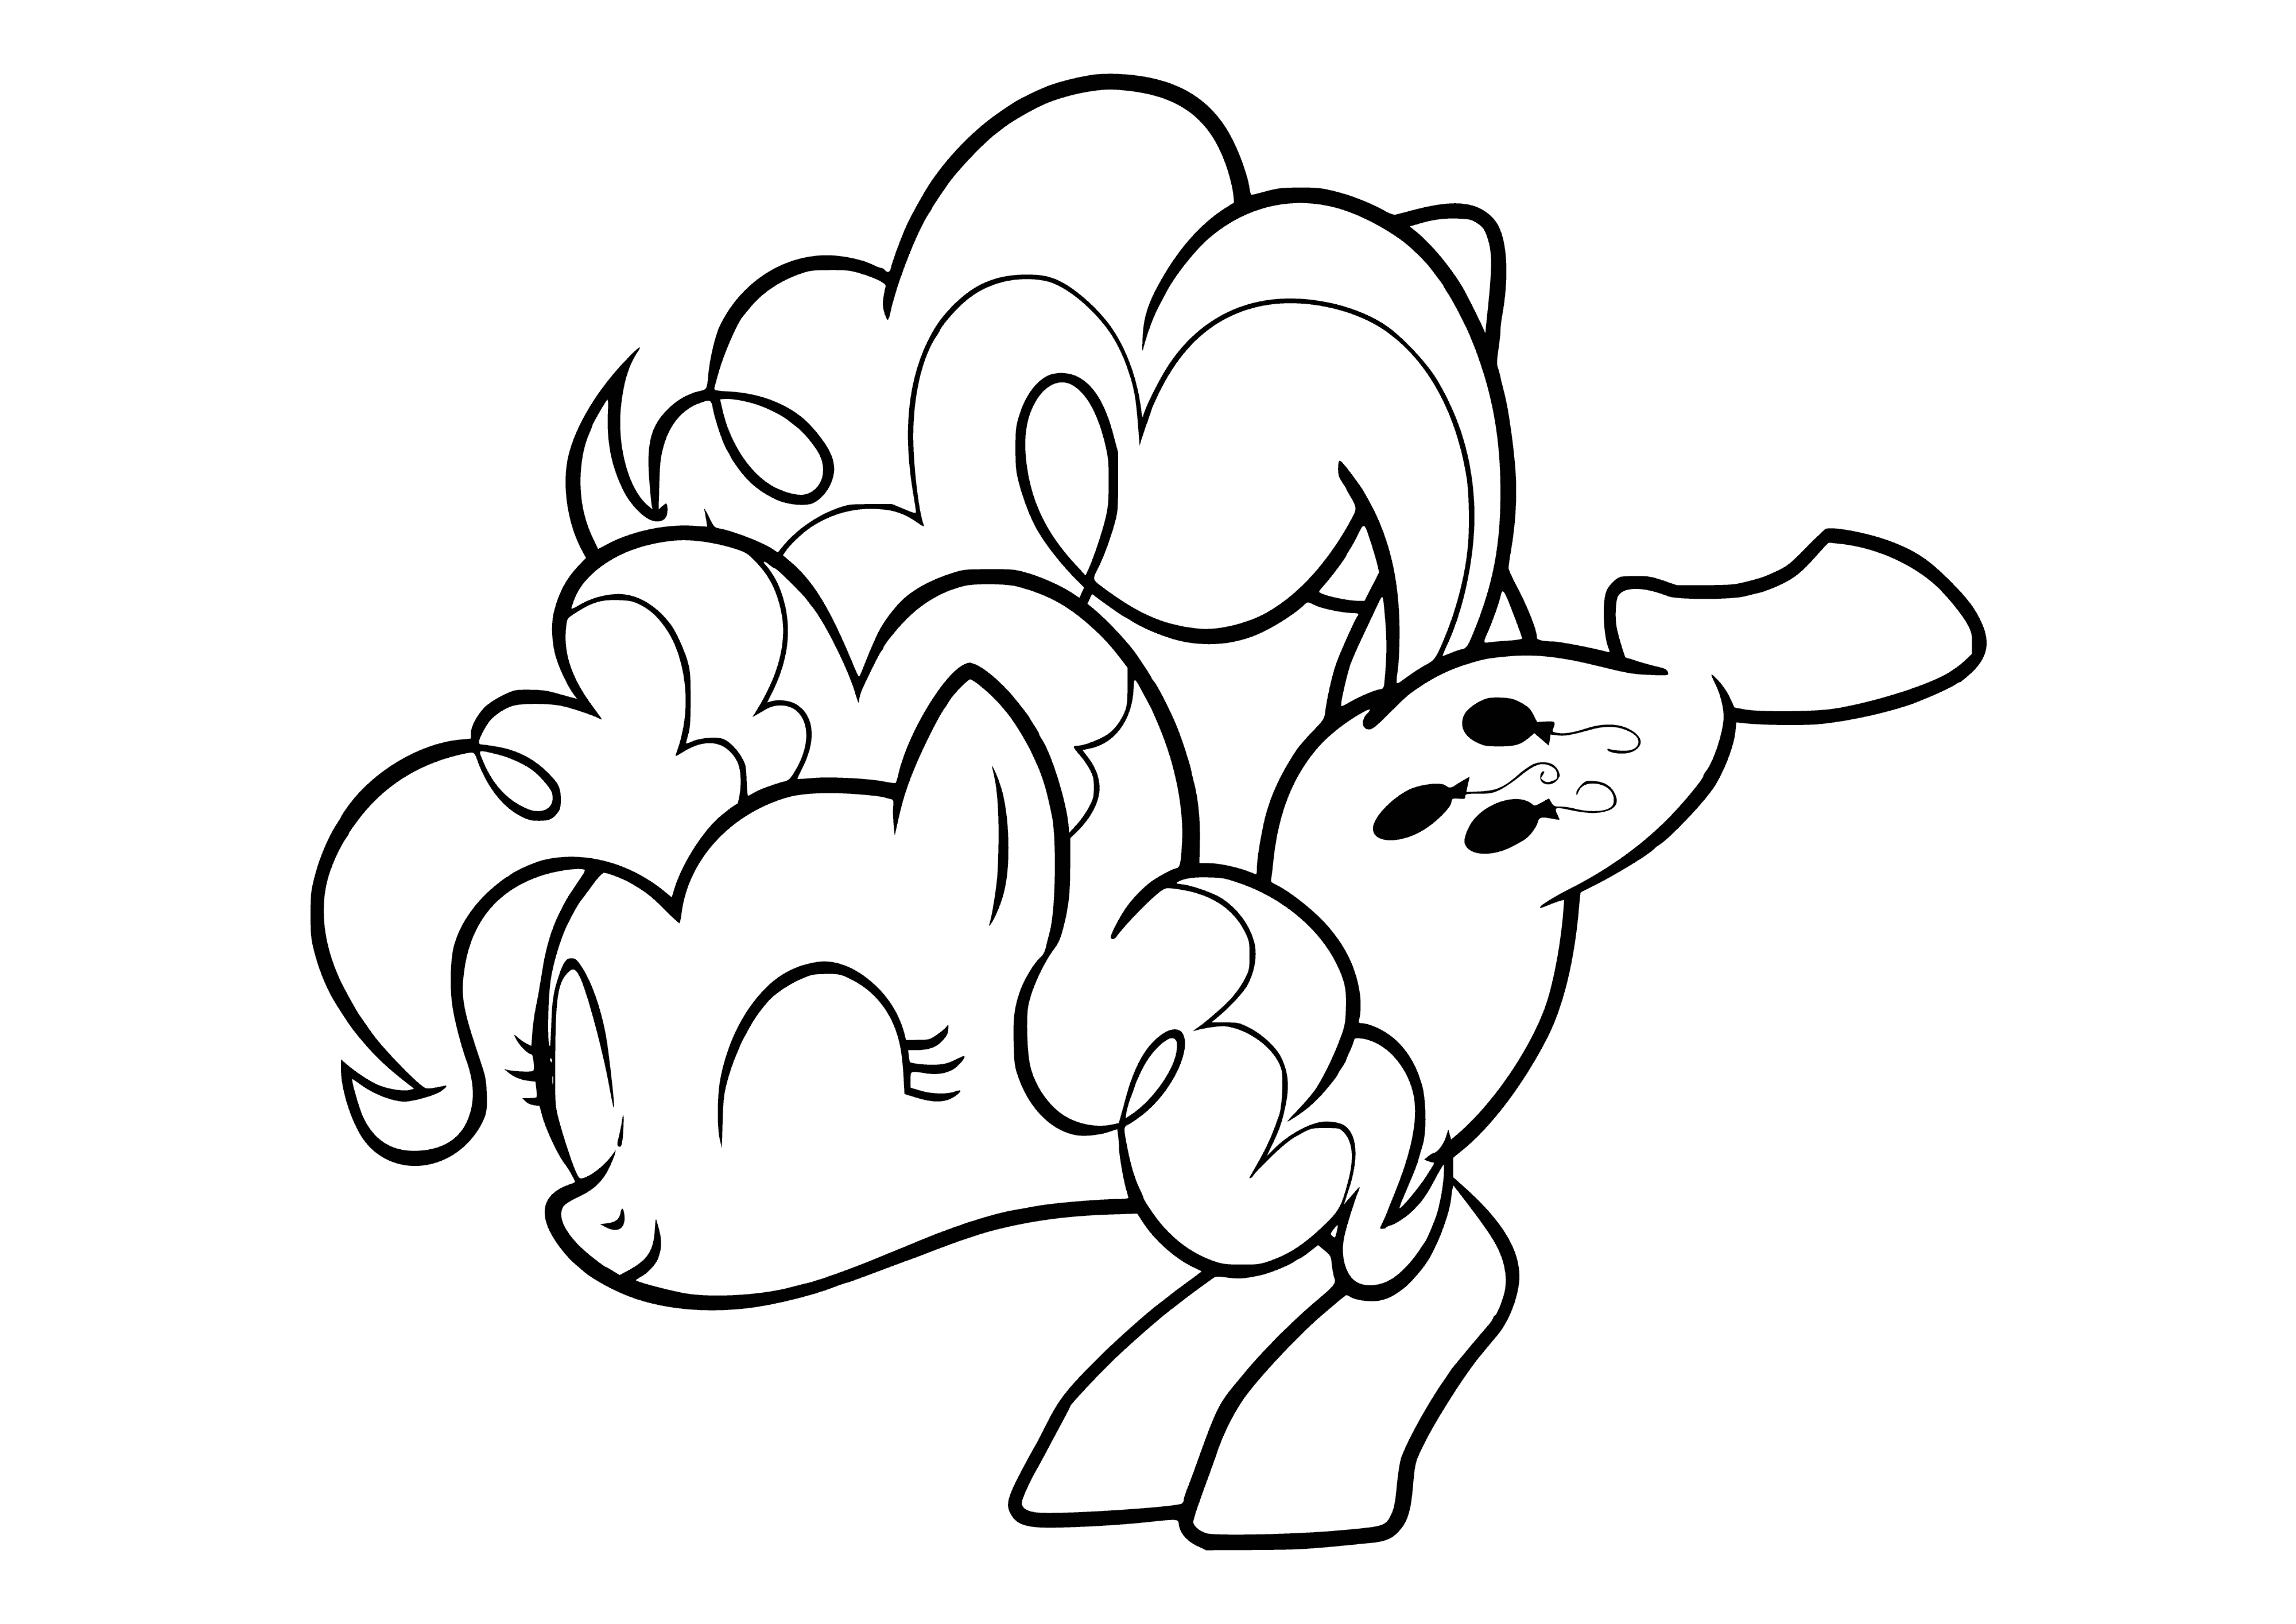 coloring page: The pink pony Pinkie Pie is always cheerful and has a long mane and tail.